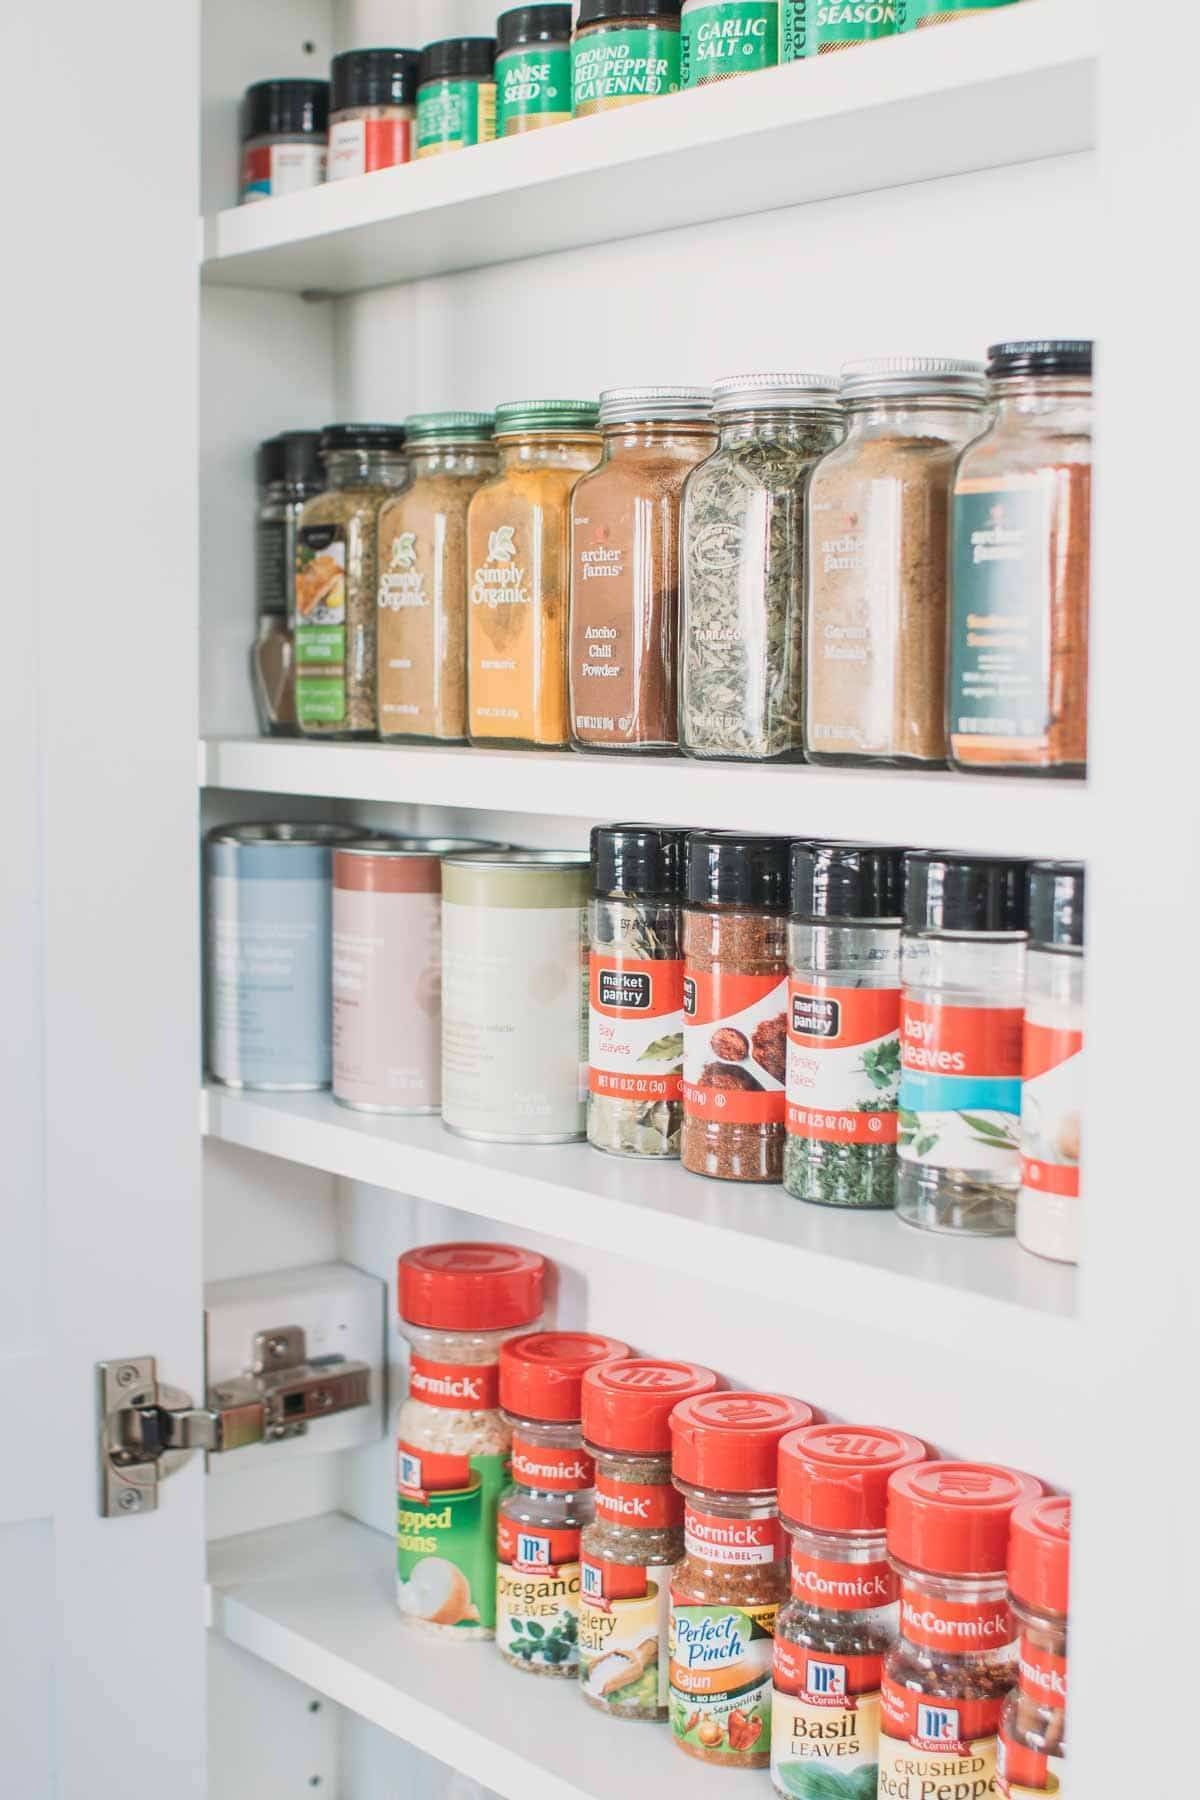 Spice cabinet.